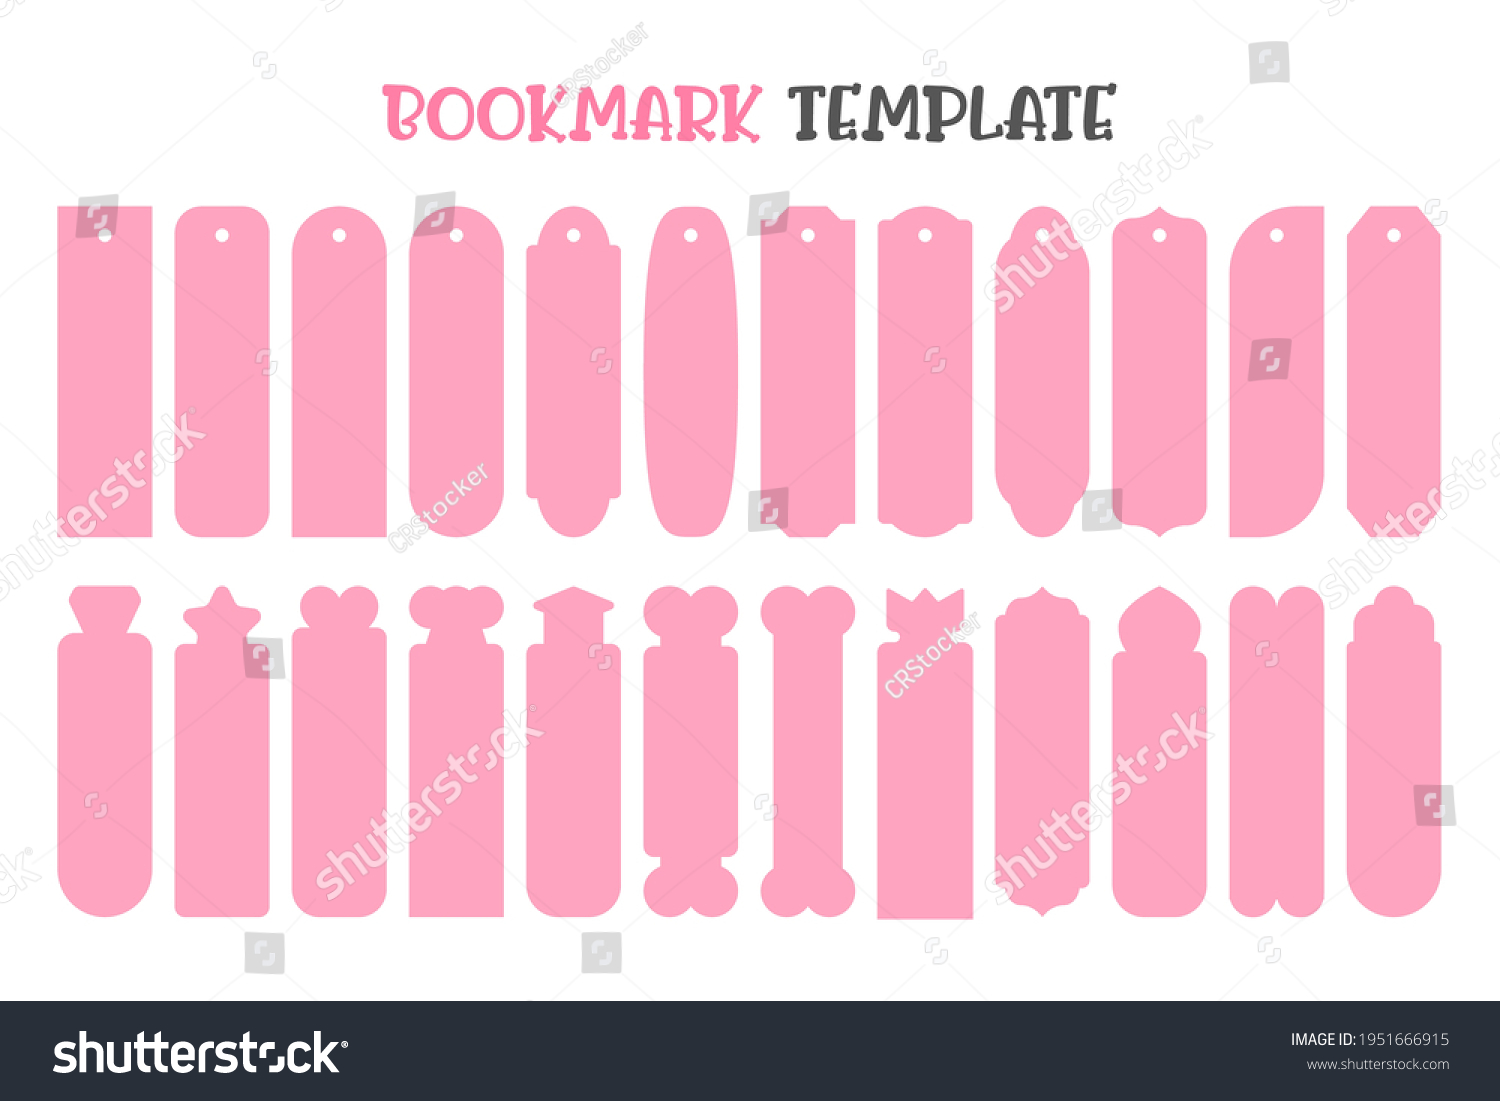 SVG of Template design vector for paper bookmarks Isolated on white background svg